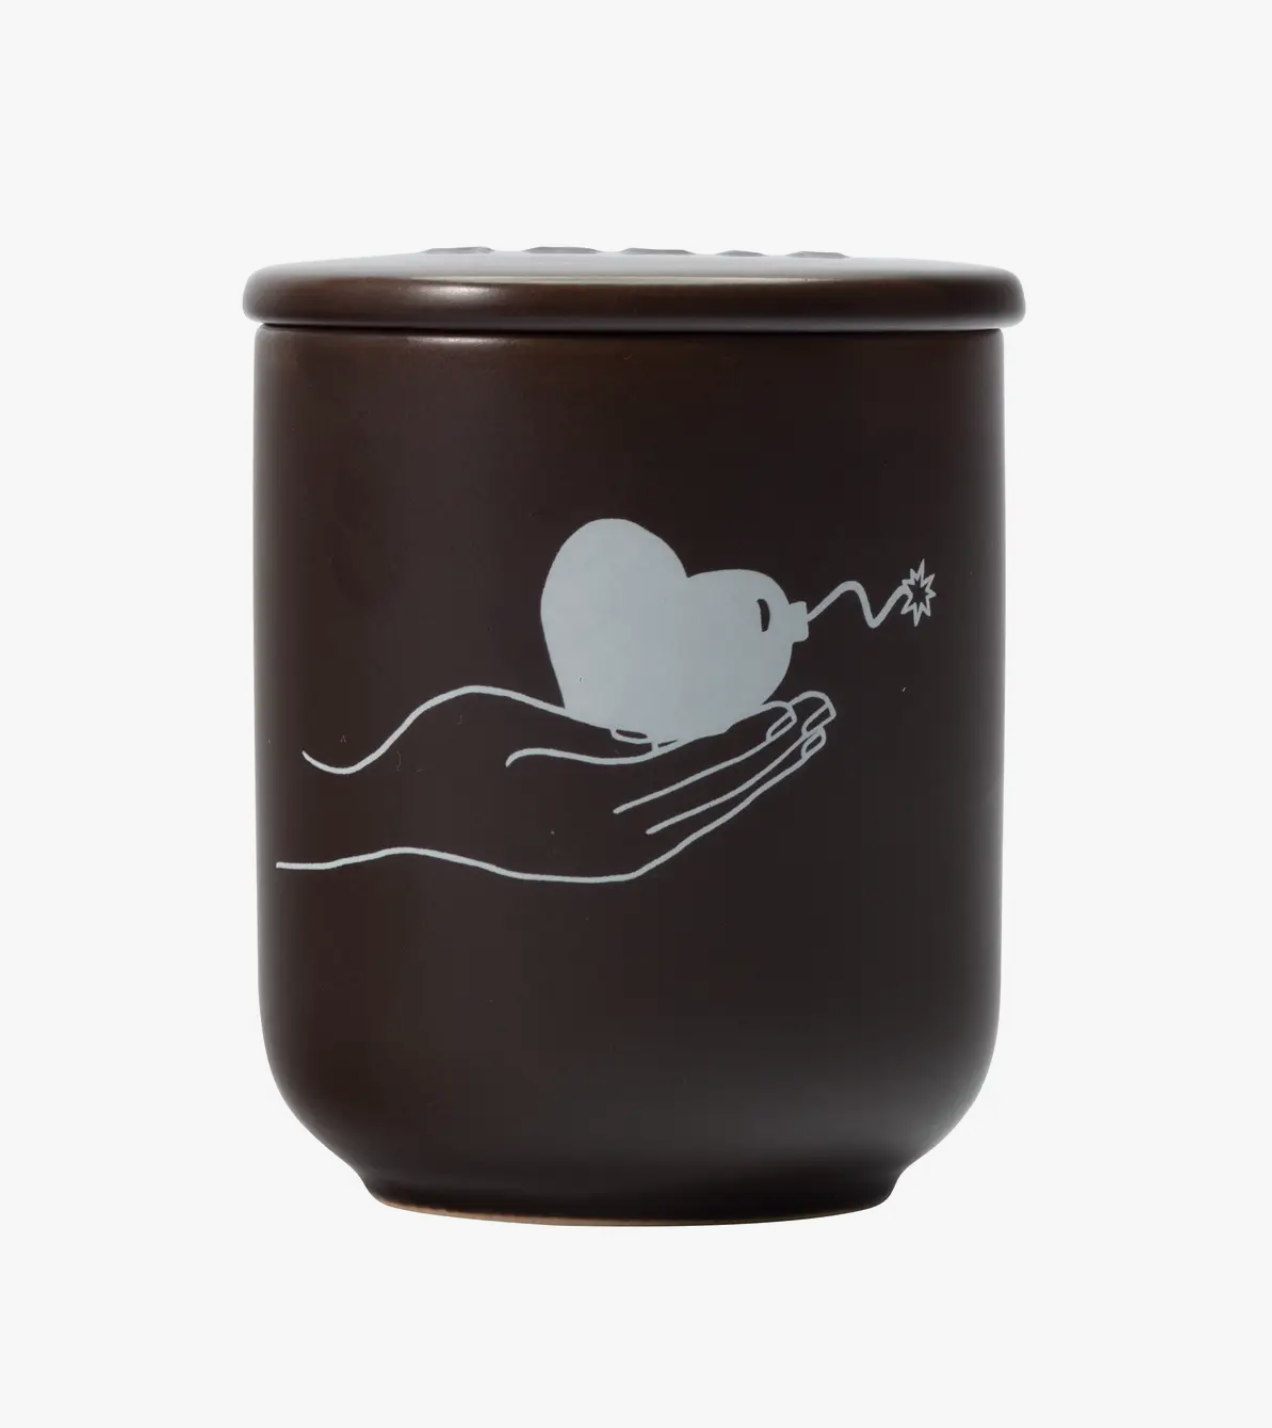 Love Bomb Vox Candle - Pink Rhubarb & Anise